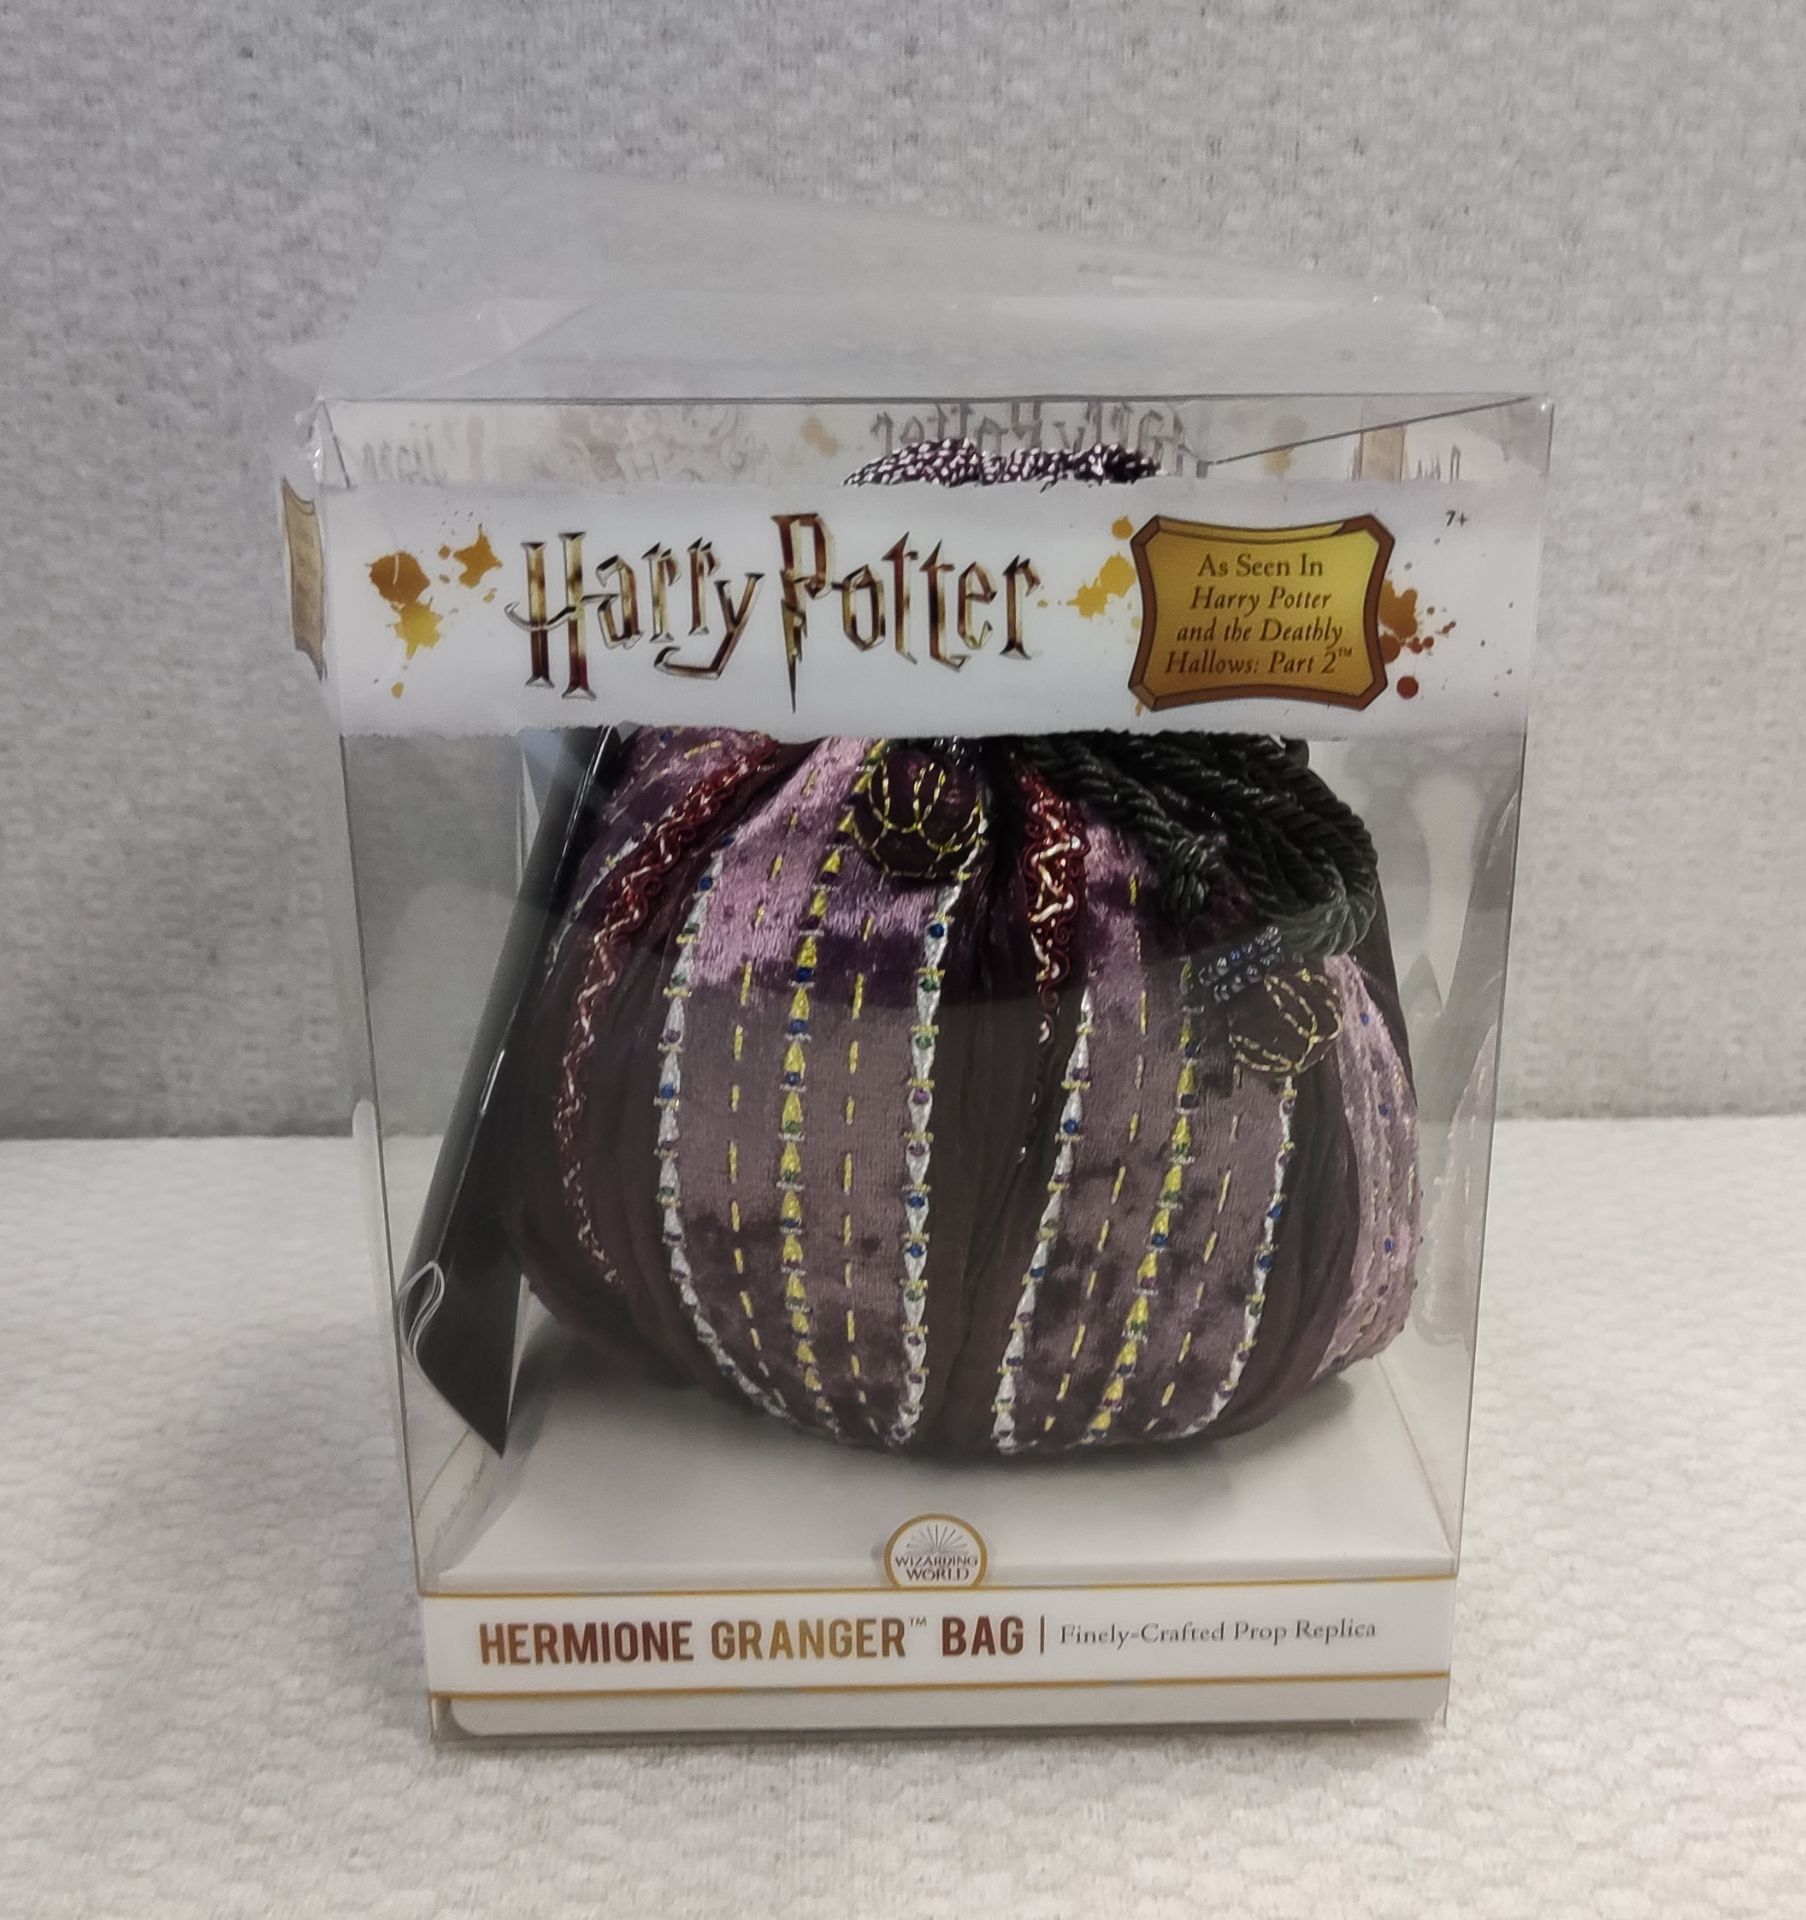 1 x Harry Potter Hermione Granger Bag Prop Replica - New/Boxed - Image 2 of 8